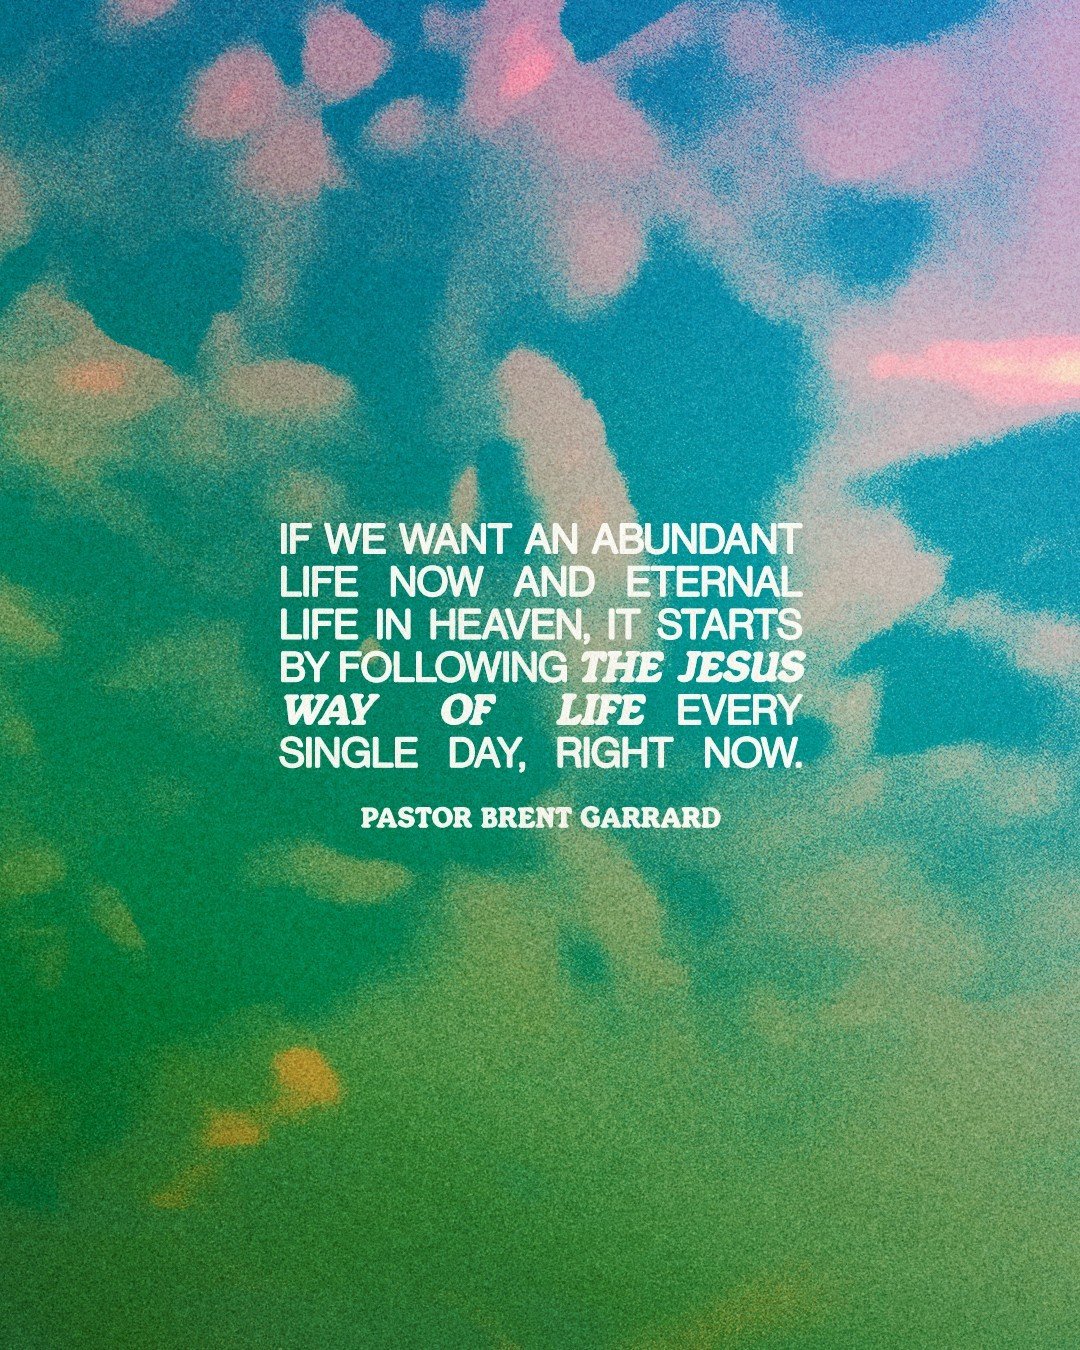 If we want an abundant life now and eternal life in heaven, it starts by following the Jesus way of life every single day, right now. #christianity #followingjesus #eternity